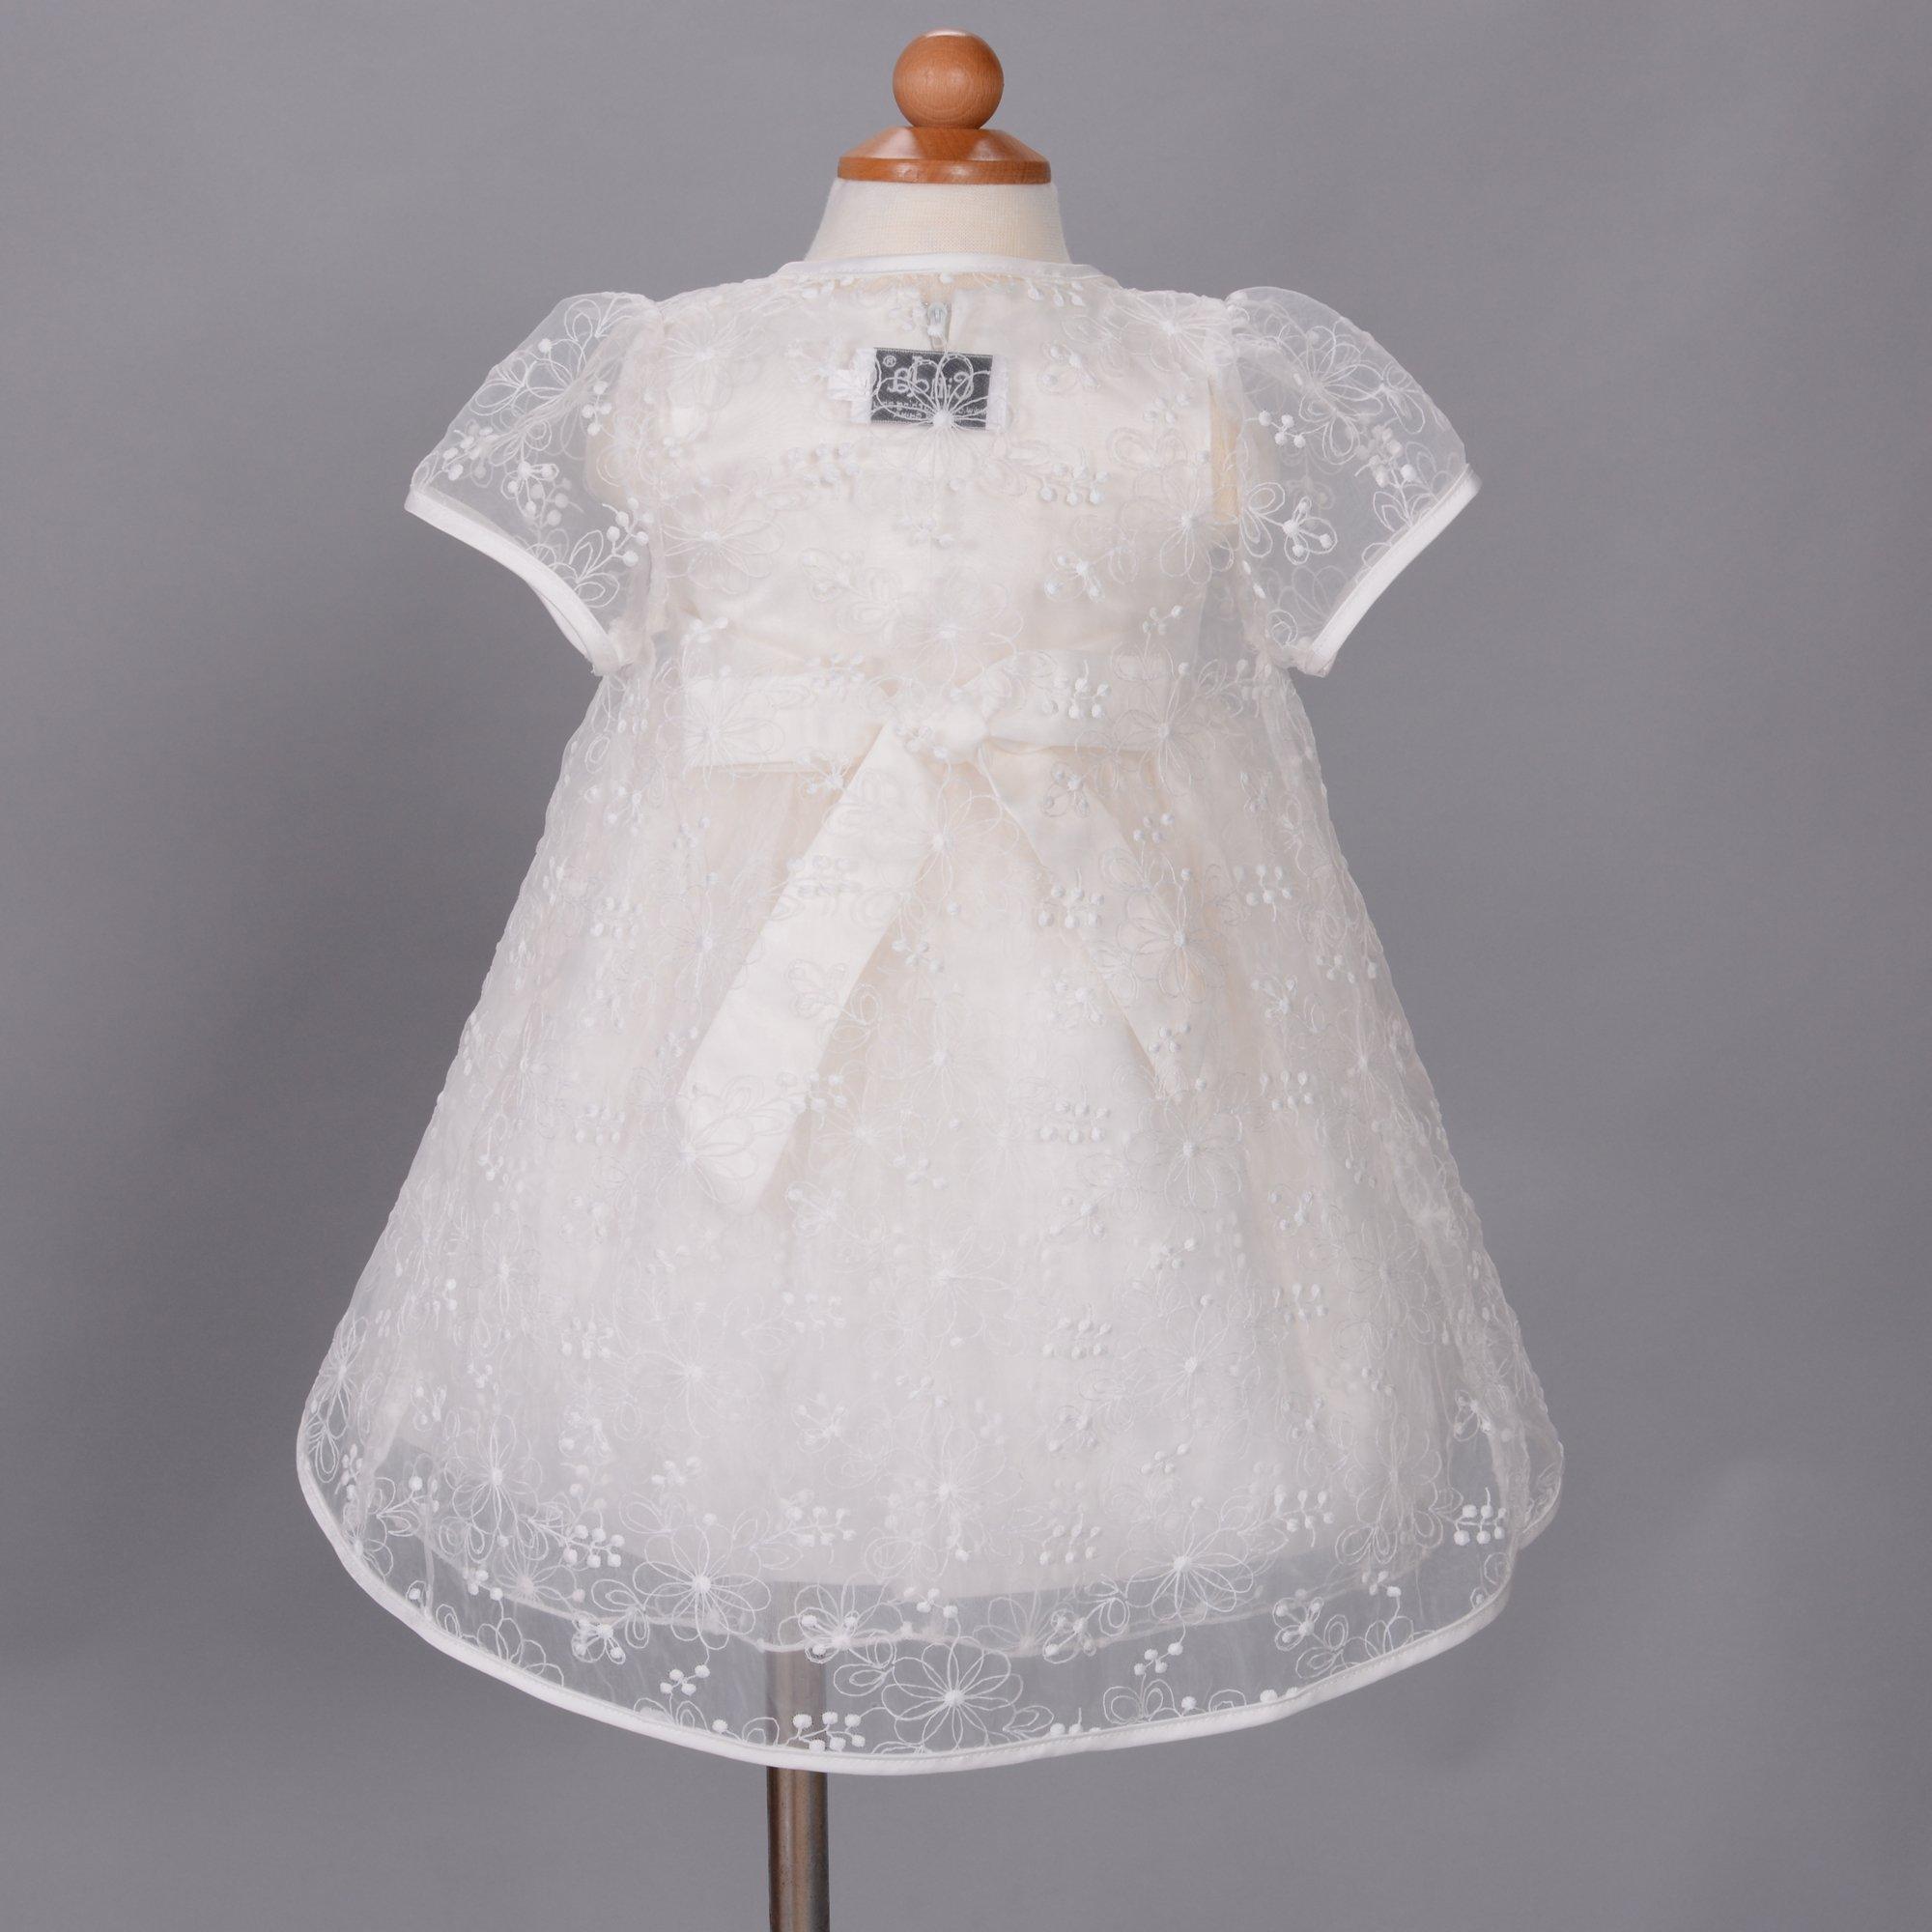 Christening gown for girl in shantung with embroidered lace and 3D flowers  - Maylin brand